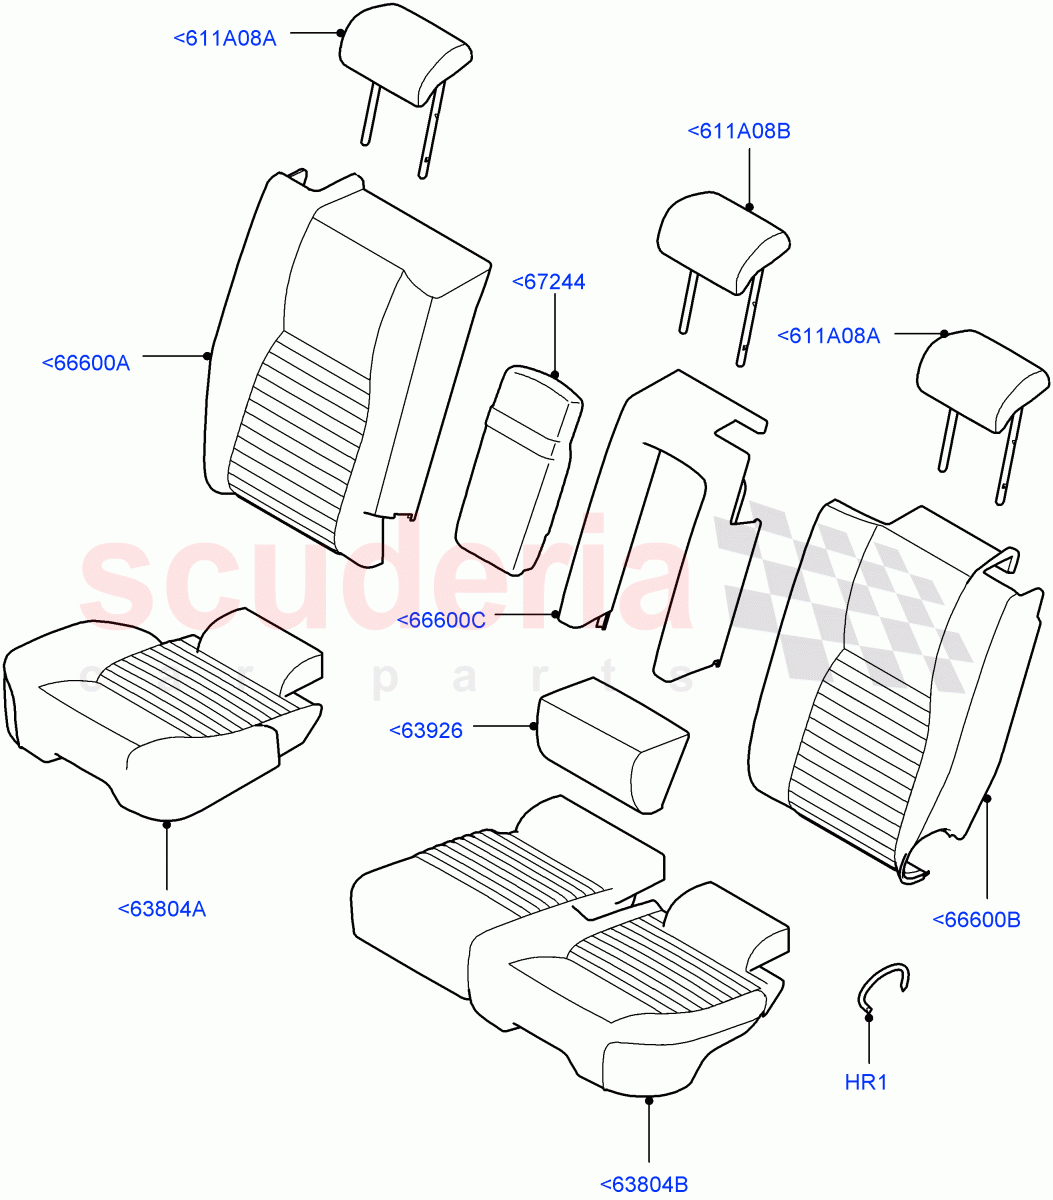 Rear Seat Covers(Taurus Leather Perforated,Changsu (China),60/40 Load Through With Slide,With 60/40 Manual Fold Thru Rr Seat)((V)FROMFG000001) of Land Rover Land Rover Discovery Sport (2015+) [2.0 Turbo Petrol GTDI]